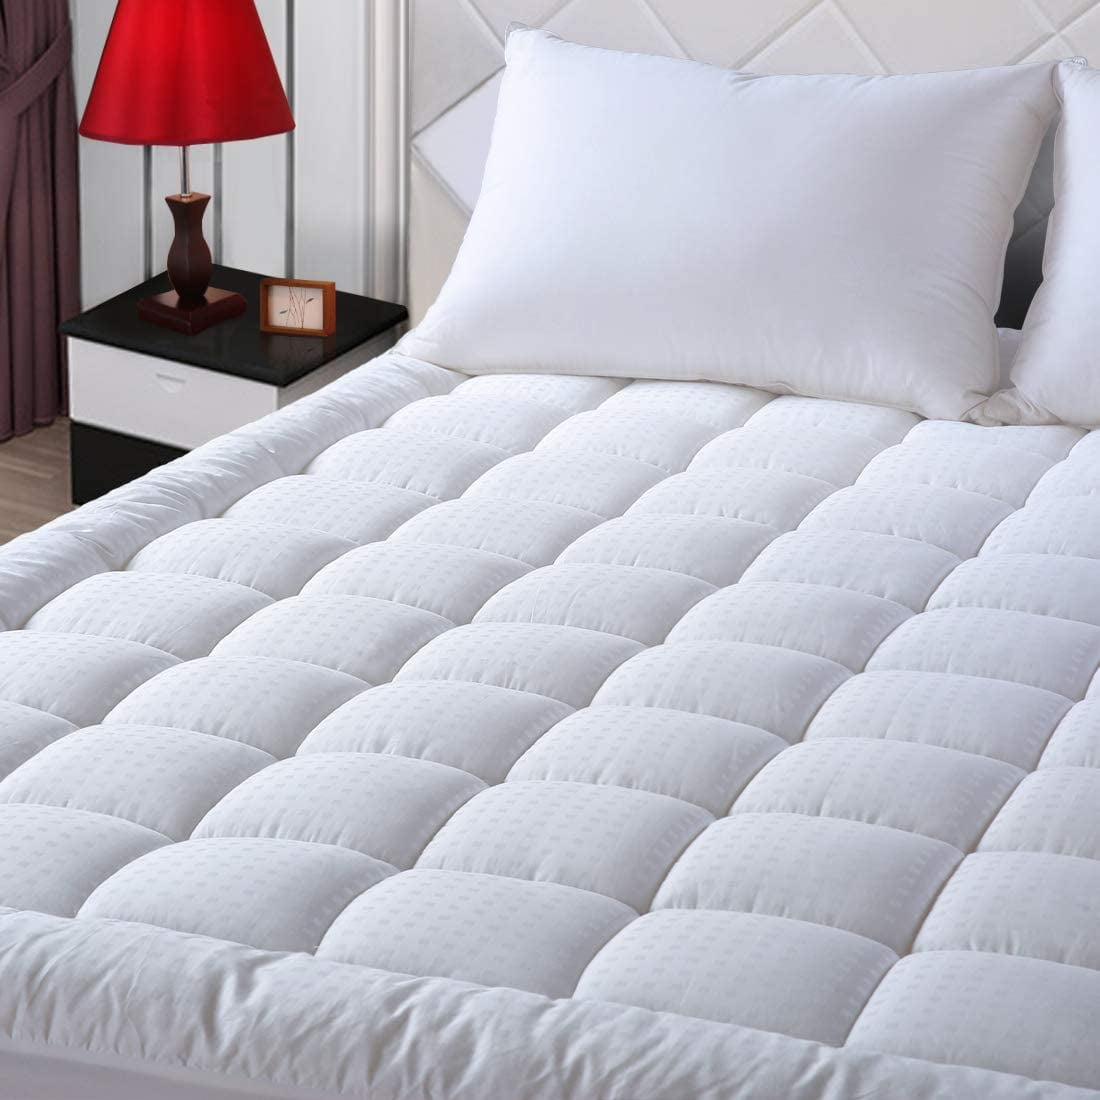 Full Size Mattress Protector Bed Cover 100 Waterproof Soft Cotton US for sale online 